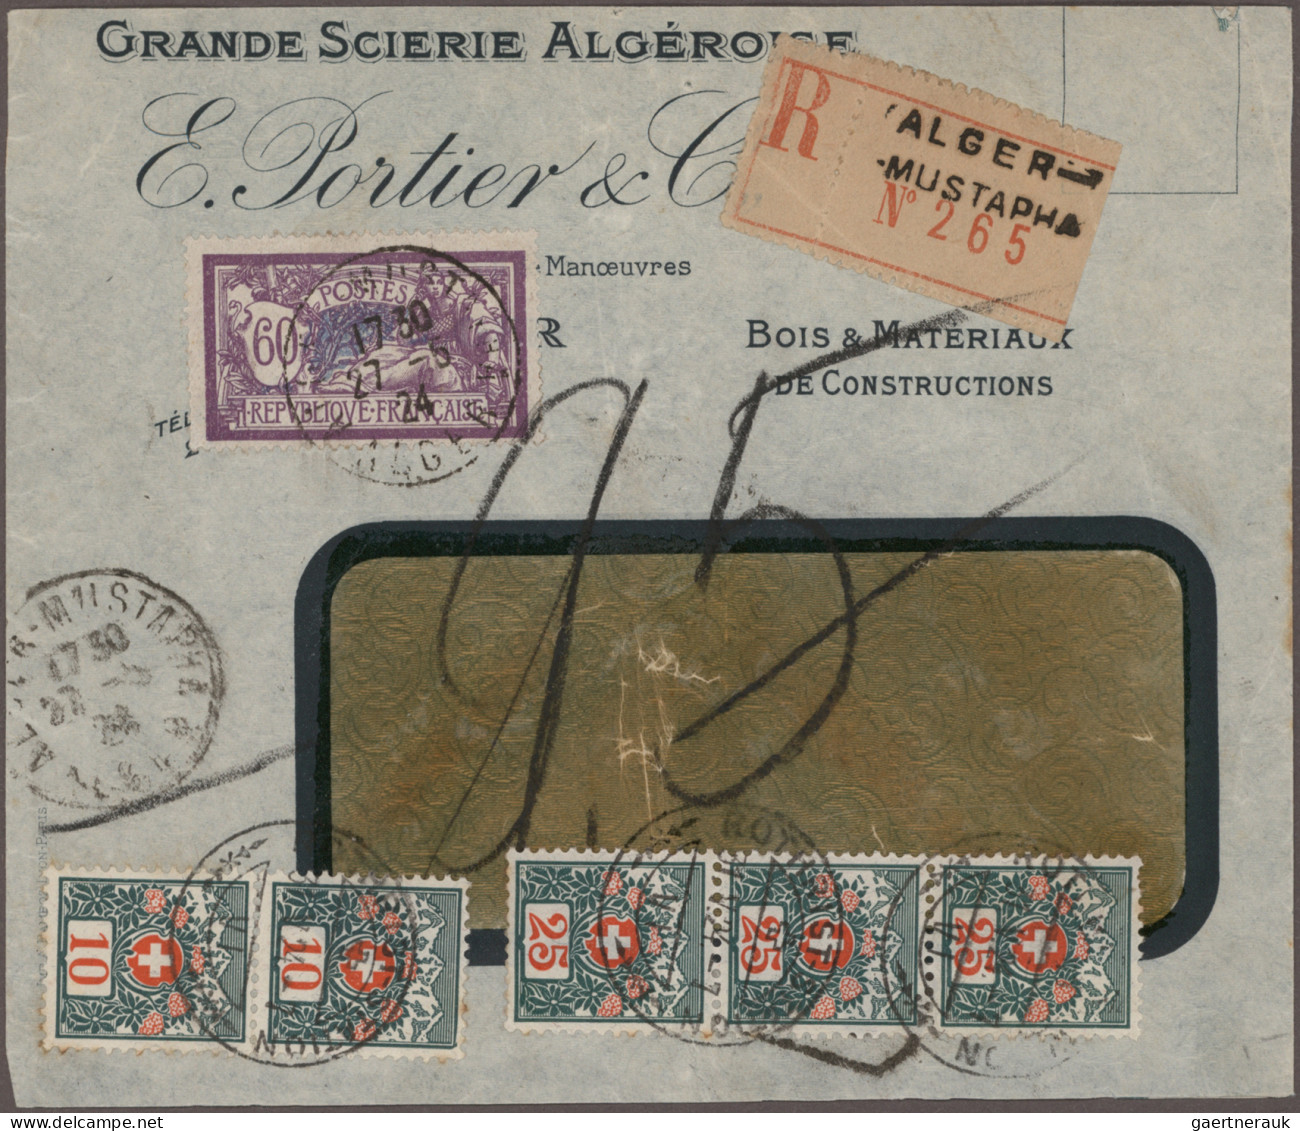 Algeria: 1901/1936: Small collection of 13 covers, picture postcards and postal